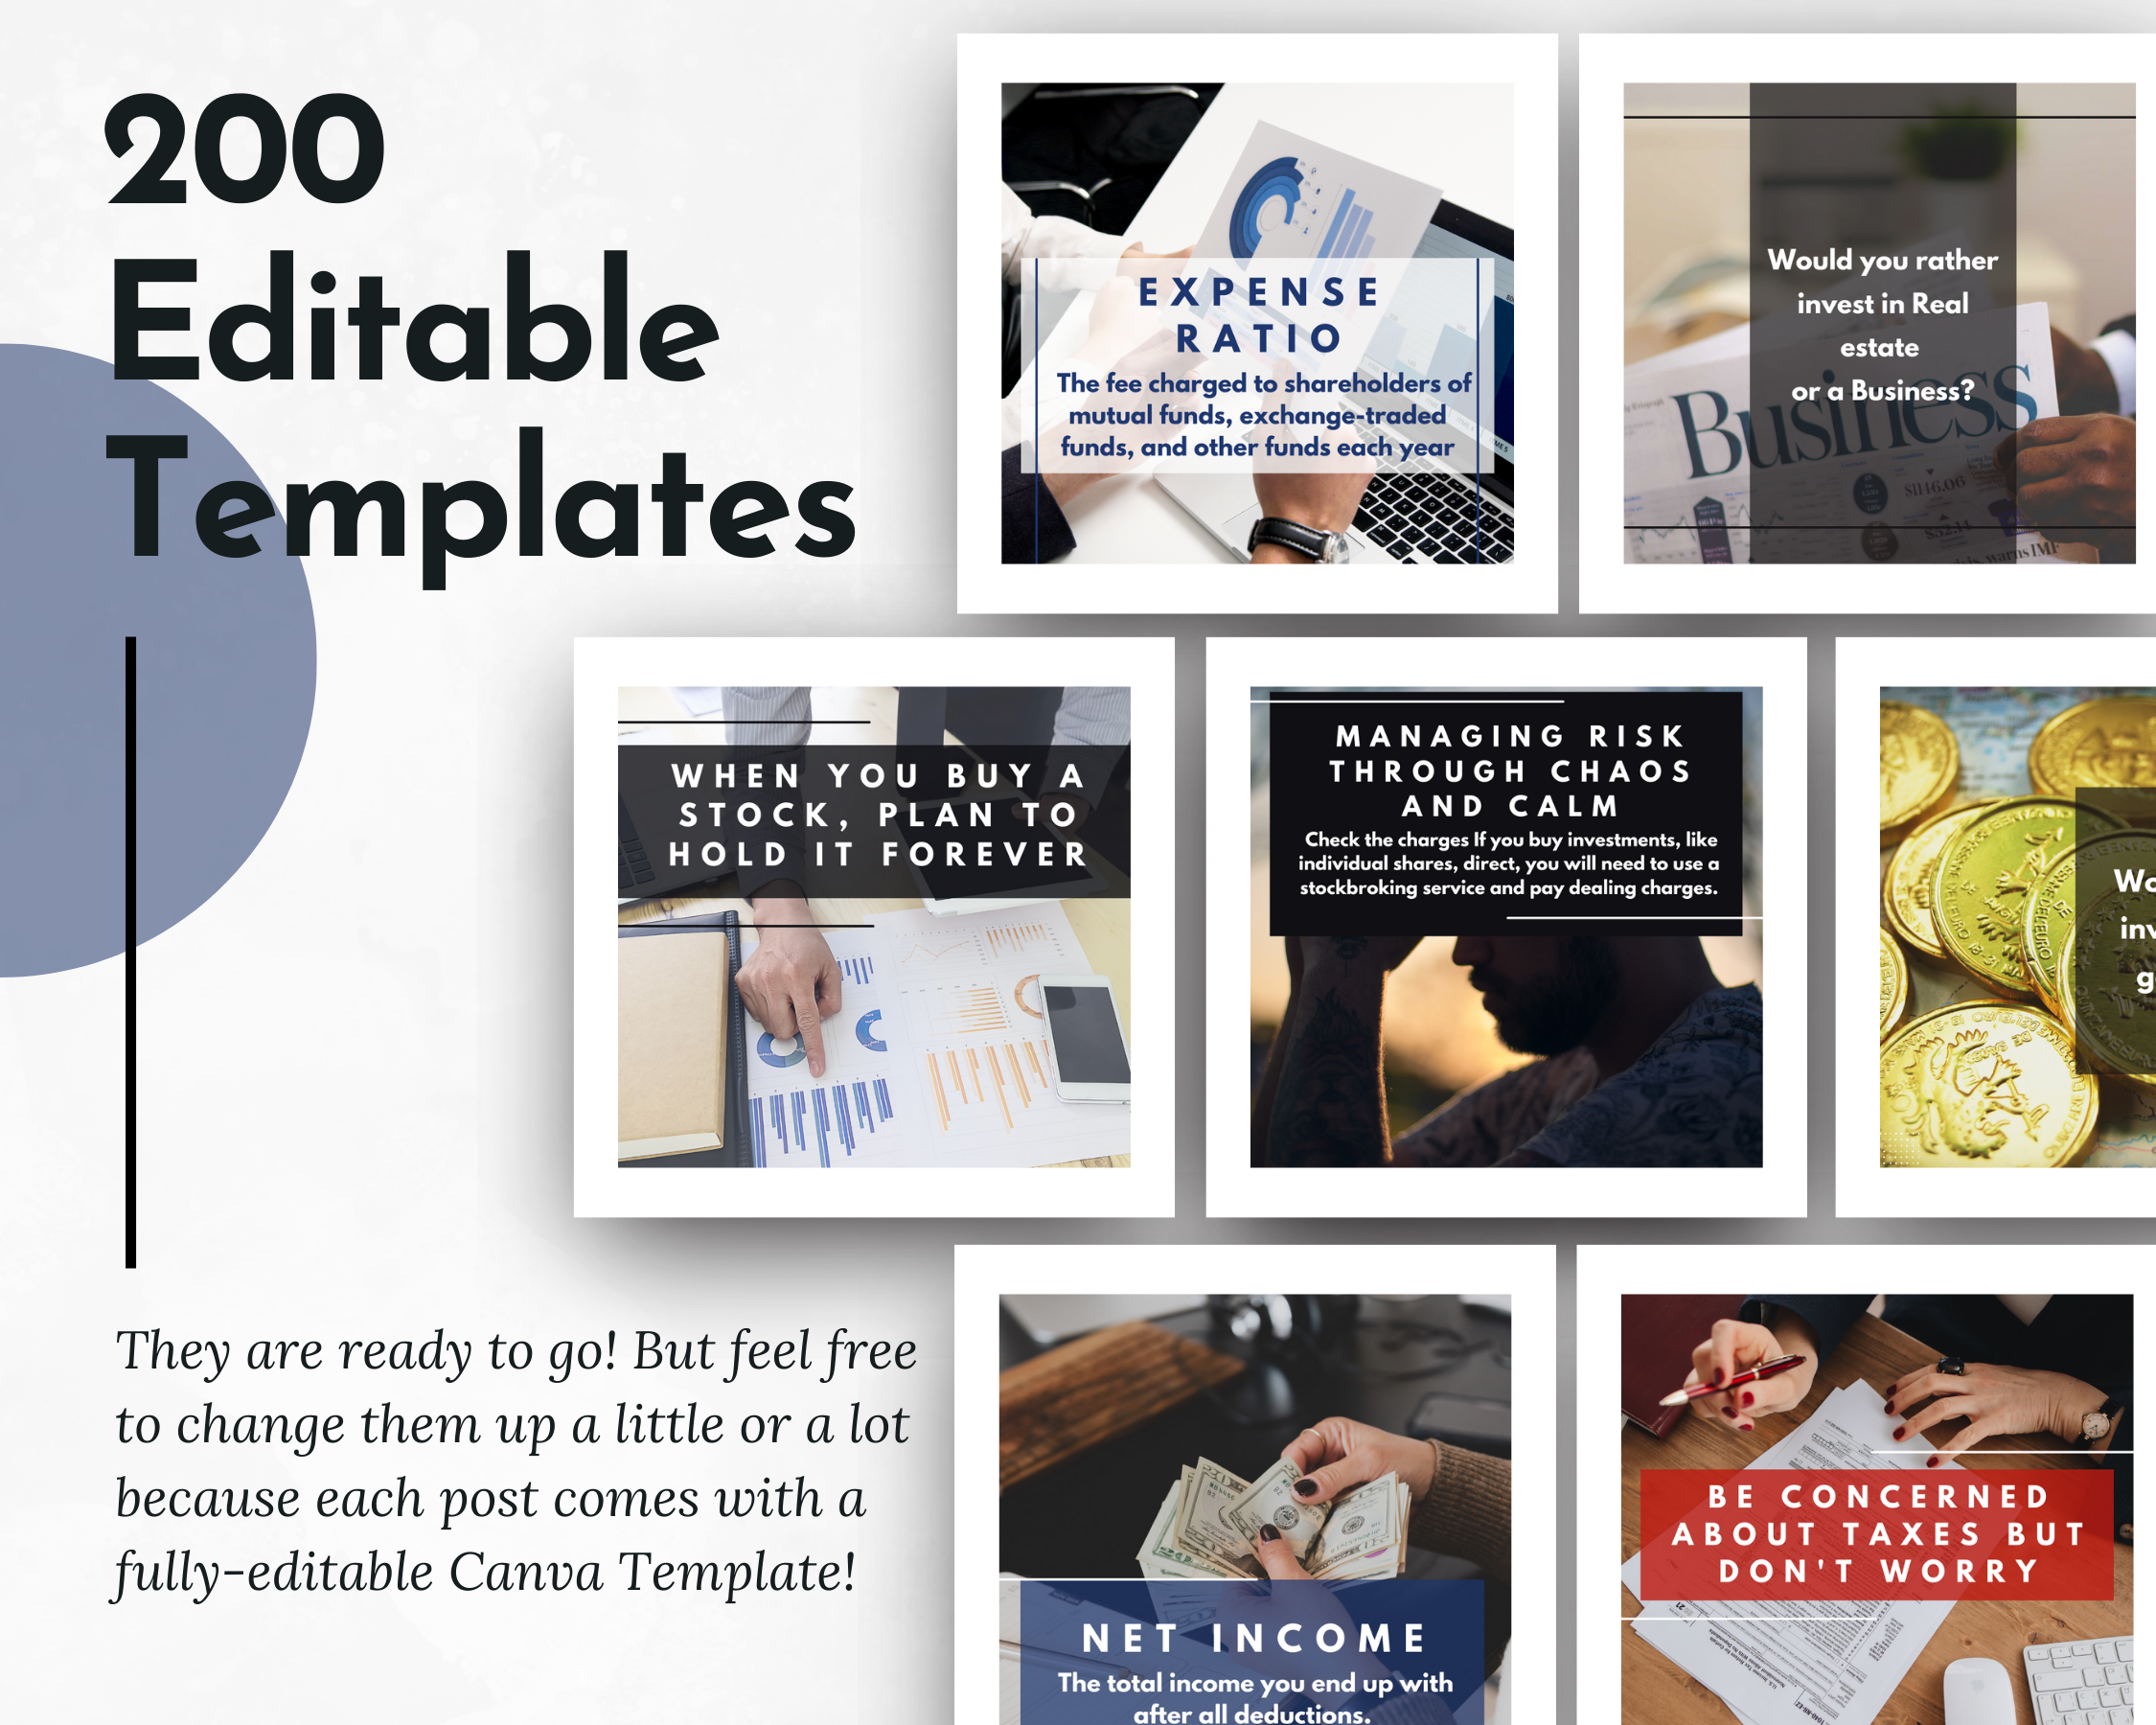 200 Finance Social Media Post Bundle with Canva Templates for Instagram by Socially Inclined.